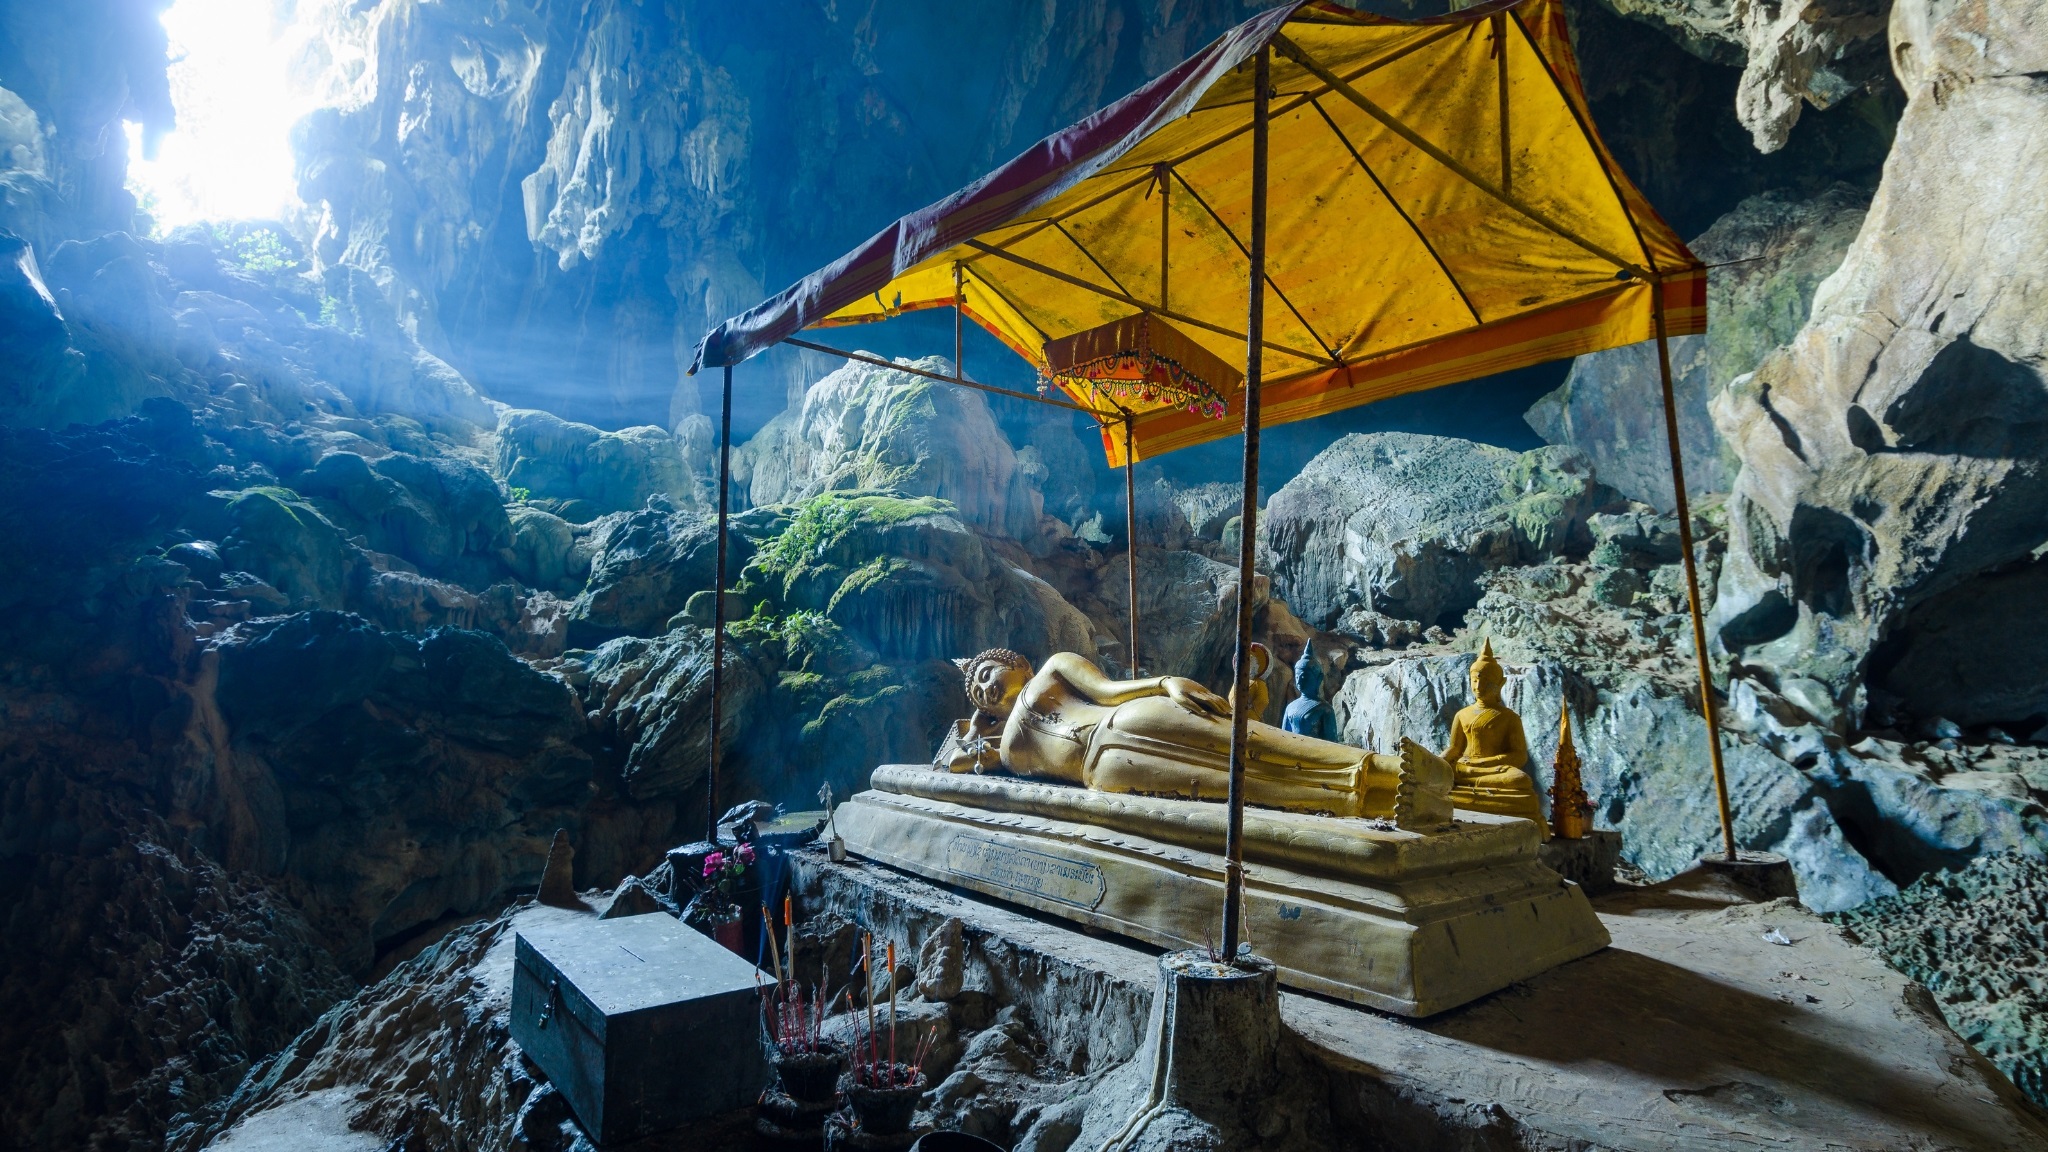 Beautiful Natural Scenery Inside The Tham Poukham Cave